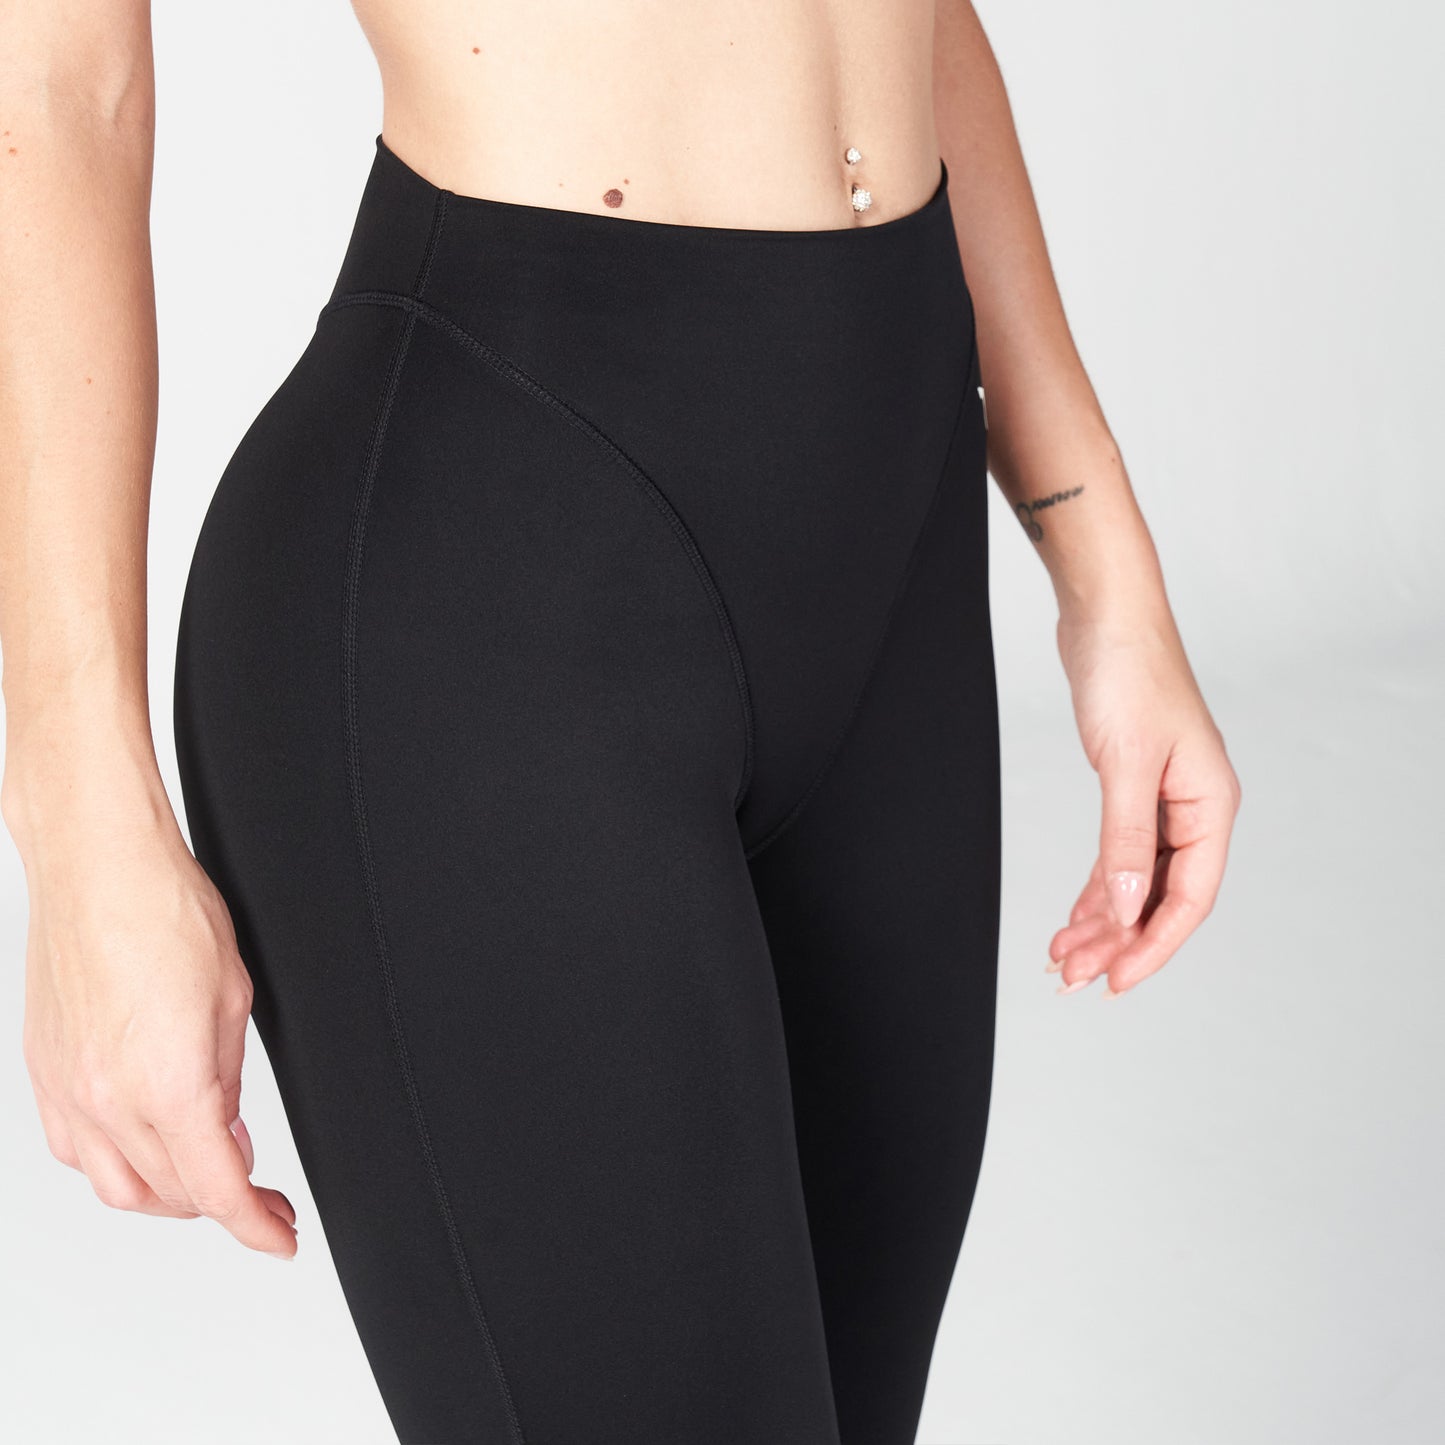 squatwolf-workout-clothes-core-v-cropped-leggings-black-gym-leggings-for-women